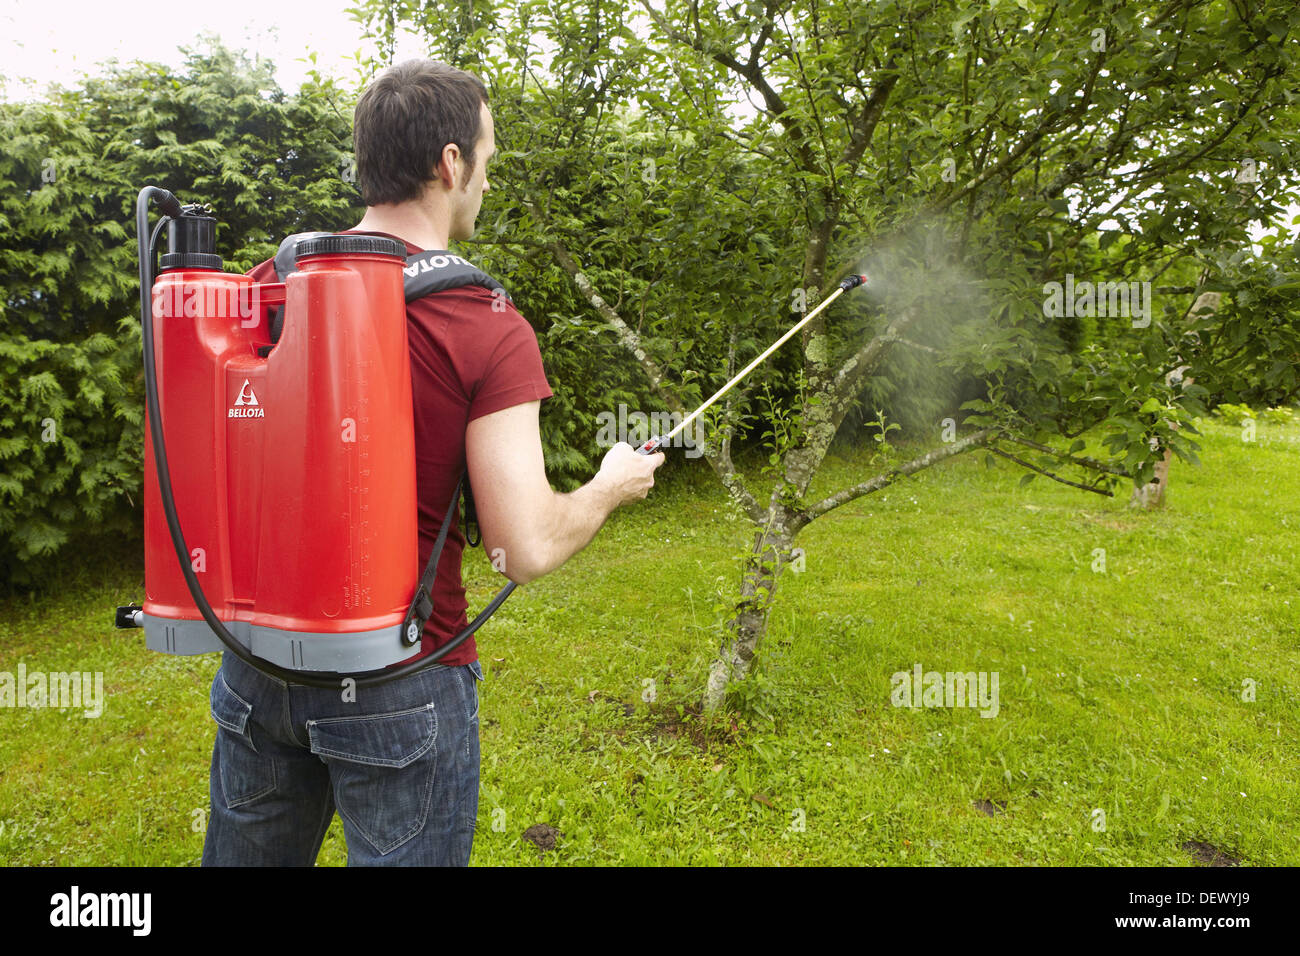 Sprayer to apply liquid fertilizer, herbicide or water, Guipuzcoa, Basque Country, Spain Stock Photo